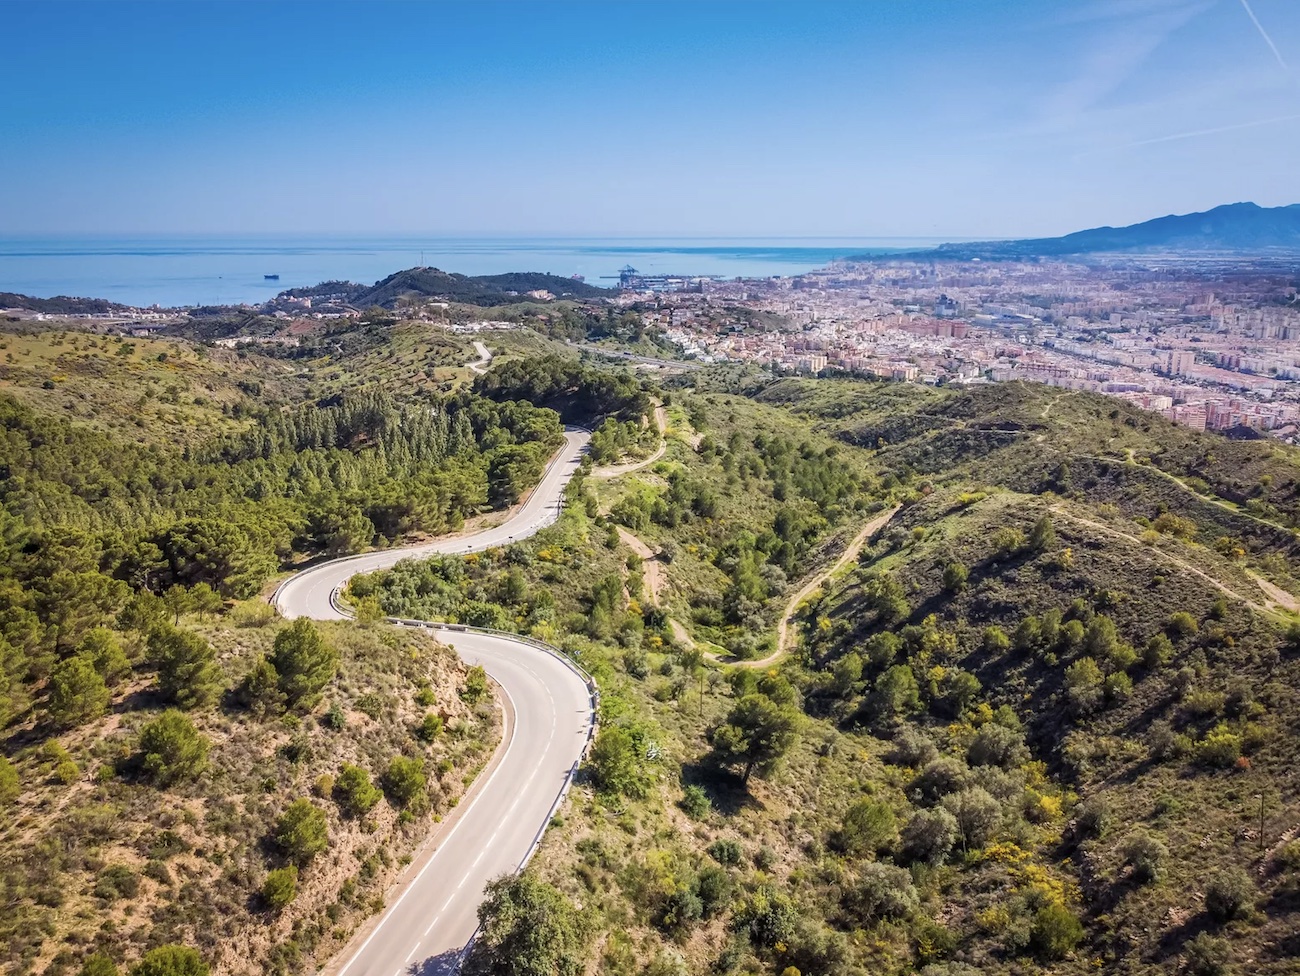 Panoramic view of Malaga with majestic mountains, cityscape, and sea, ideal for spring hiking adventures.